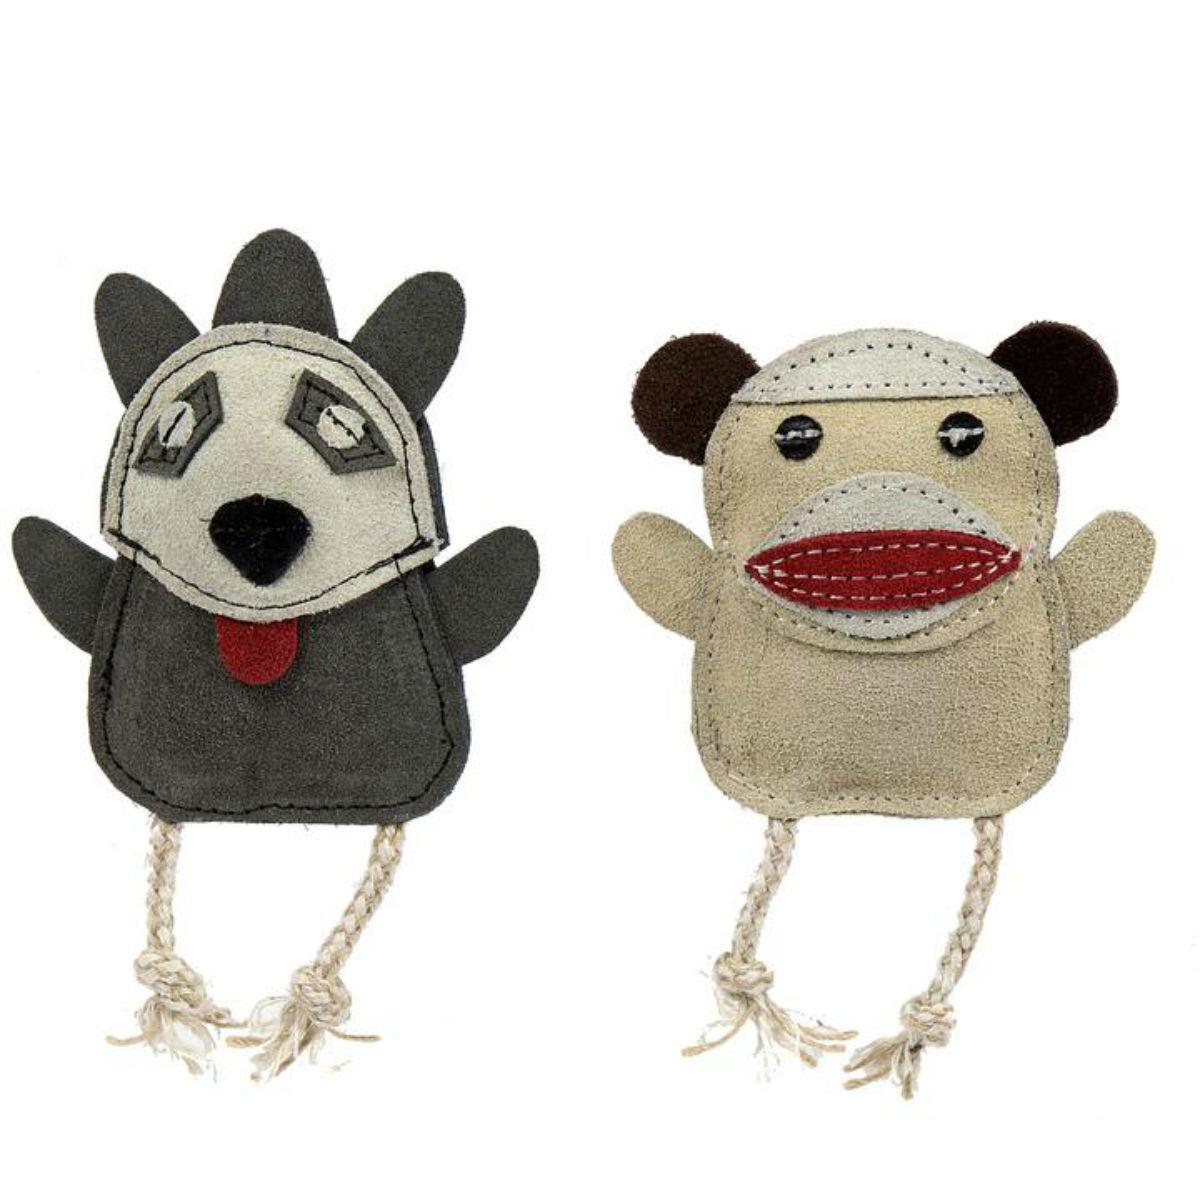 HuggleHounds Naturals Wee Buddie Dog Toy - Monkey and Raccoon